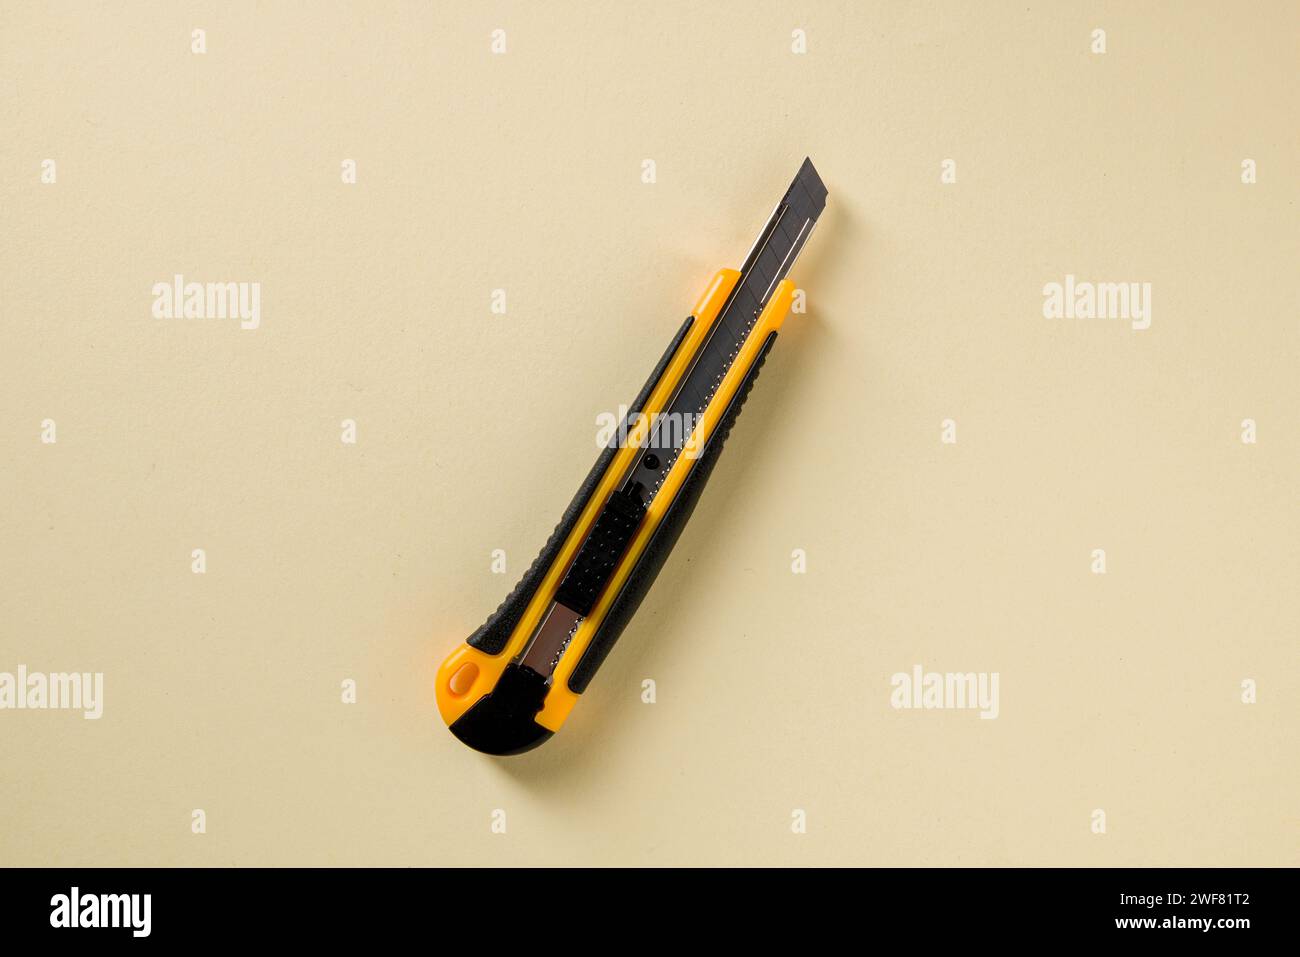 Utility knife with yellow and black handle on a yellow background Stock Photo